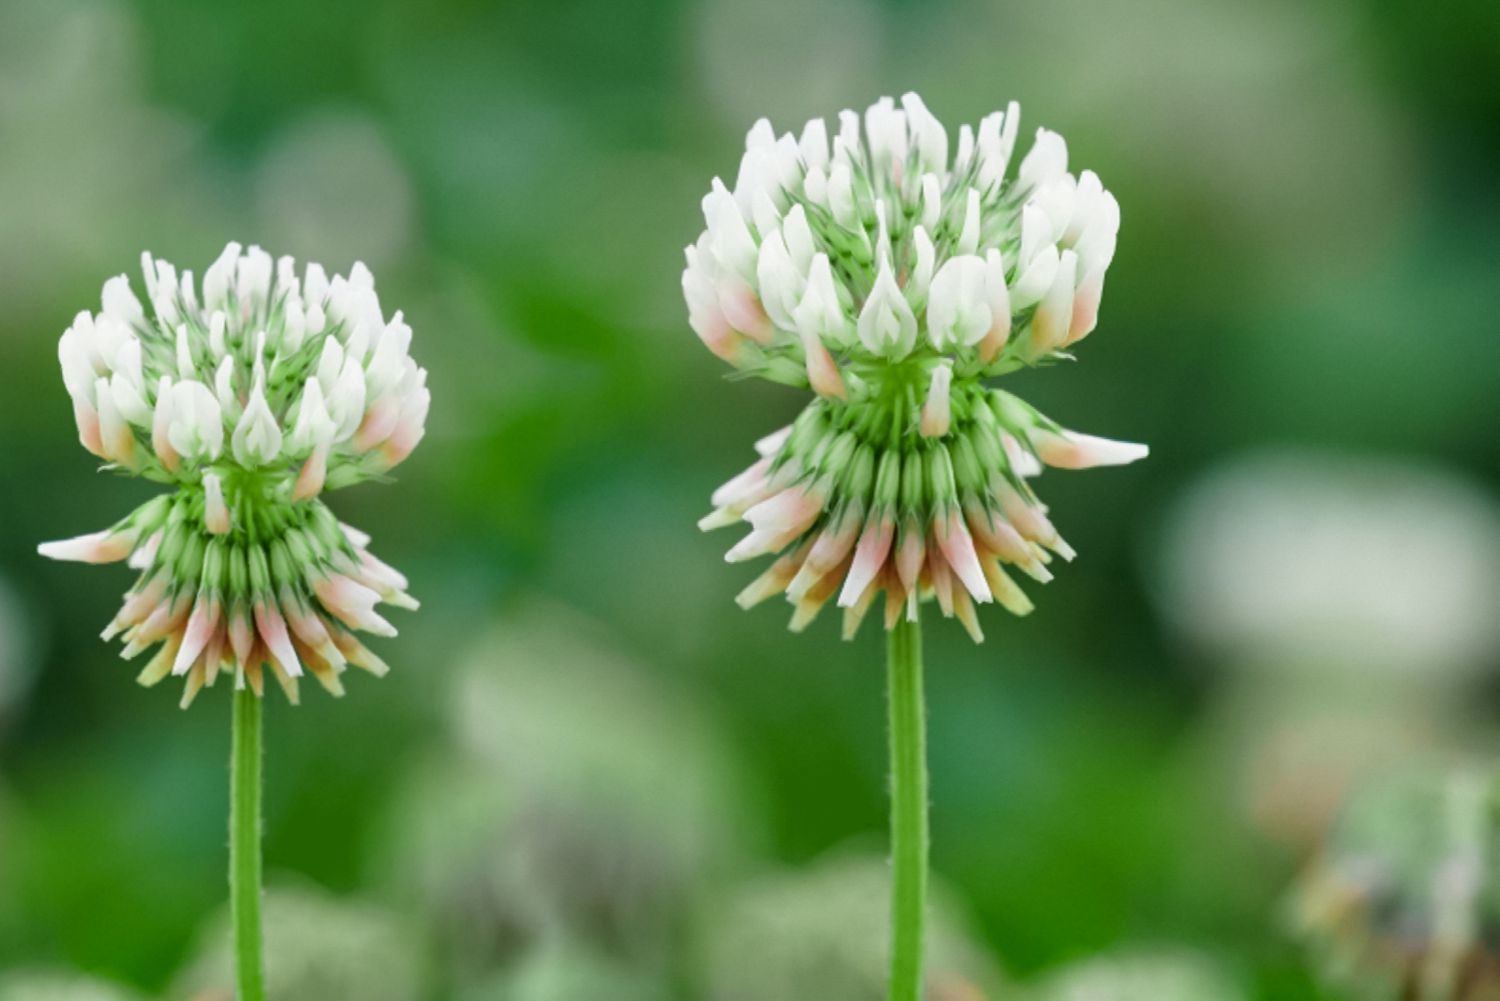 White clover flowers with small white petals clustered upward and buds underneath closeup